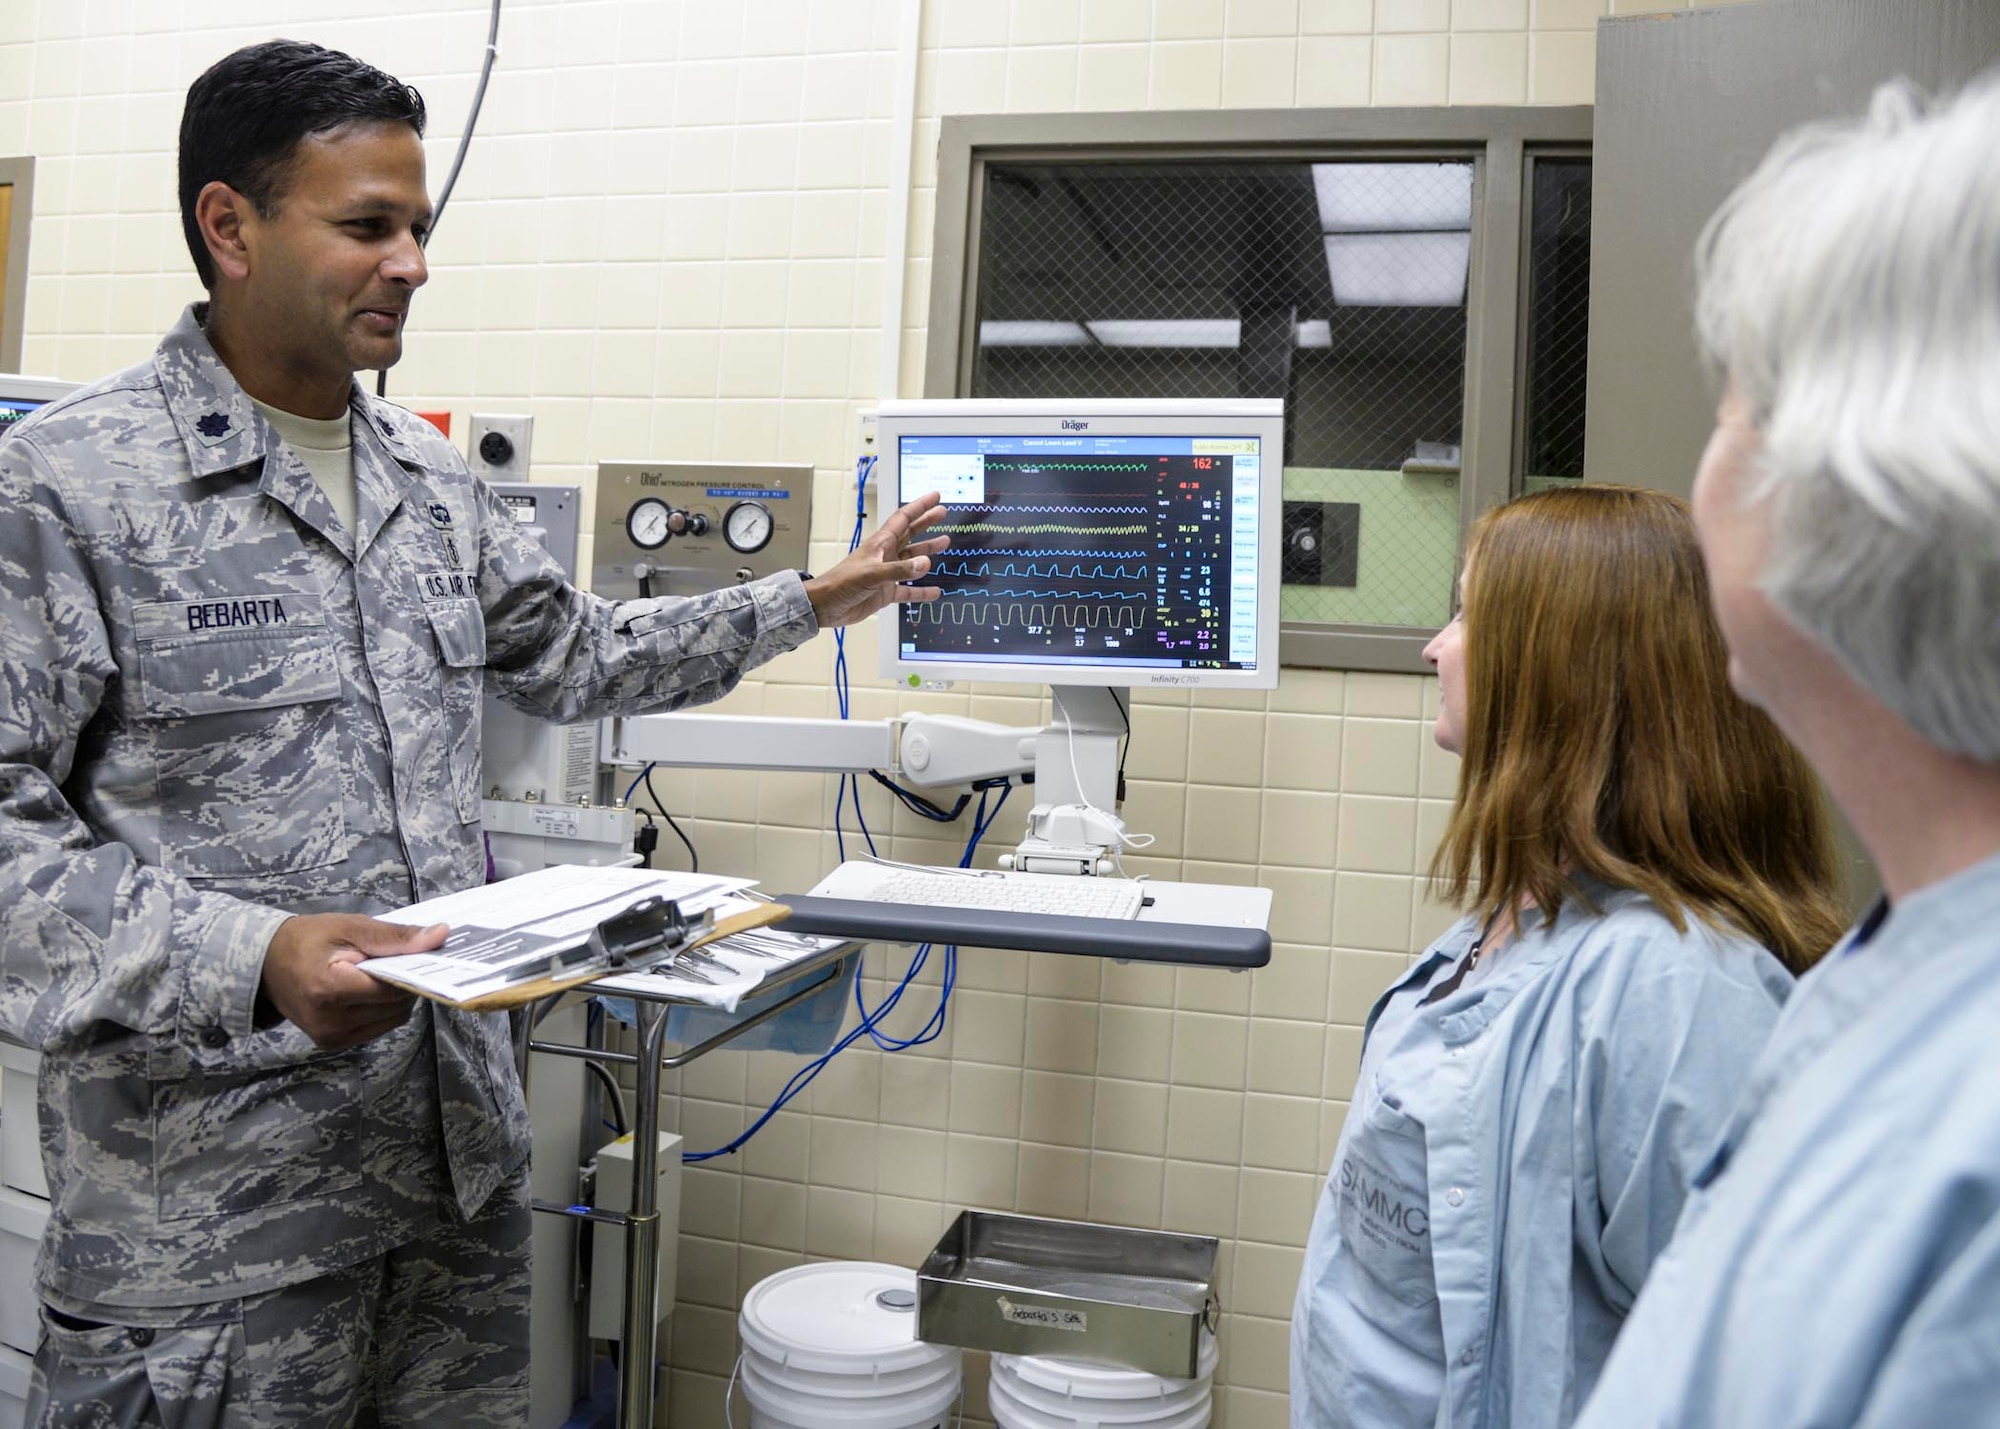 Air Force Lt. Col. Vikhyat Bebarta, director of the 59th Medical Wing En Route Care Research Center (ECRC) and chief of medical toxicology at the San Antonio Military Medical Center on nearby Joint Base San Antonio-Fort Sam Houston, reviews statistics with fellow research technicians at the Wilford Hall Ambulatory Surgical Center, Joint Base San Antonio-Lackland, Texas, Aug. 12. Bebarta garnered the Gen. Paul W. Myers award and the National Society for Academic Emergency Medicine Basic Science award. (U.S. Air Force photo/Staff Sgt. Kevin Iinuma)